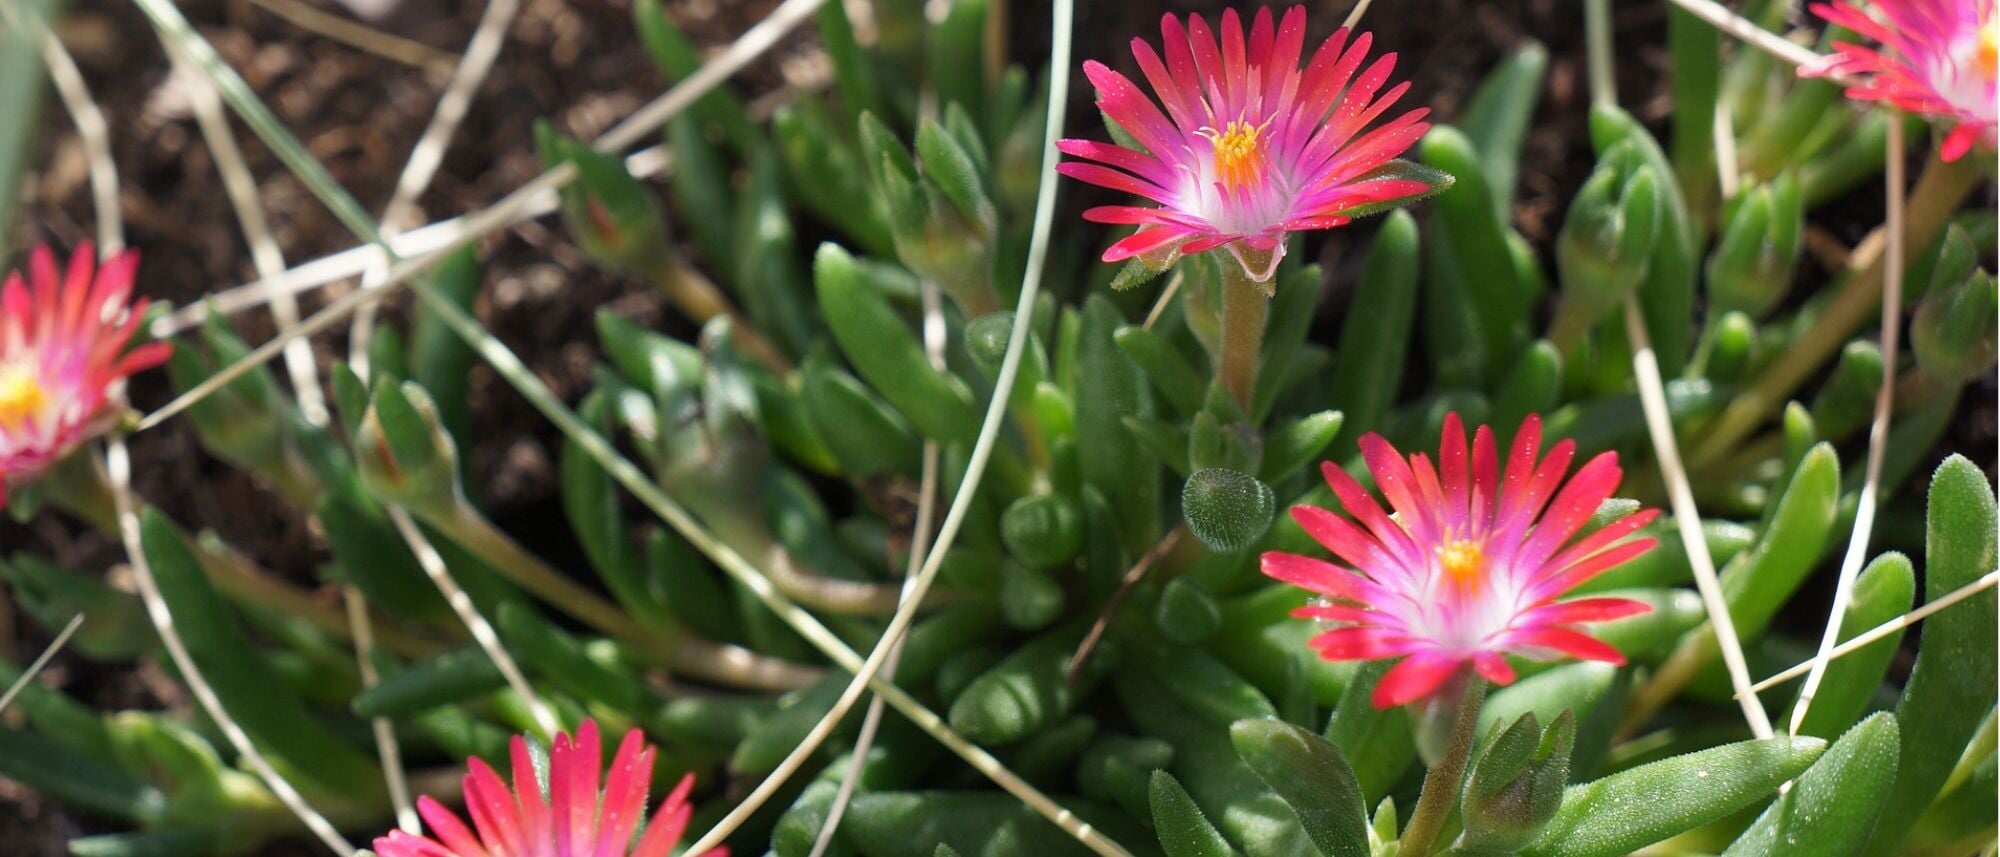 Pink ice plant flower growing succulent like leaves